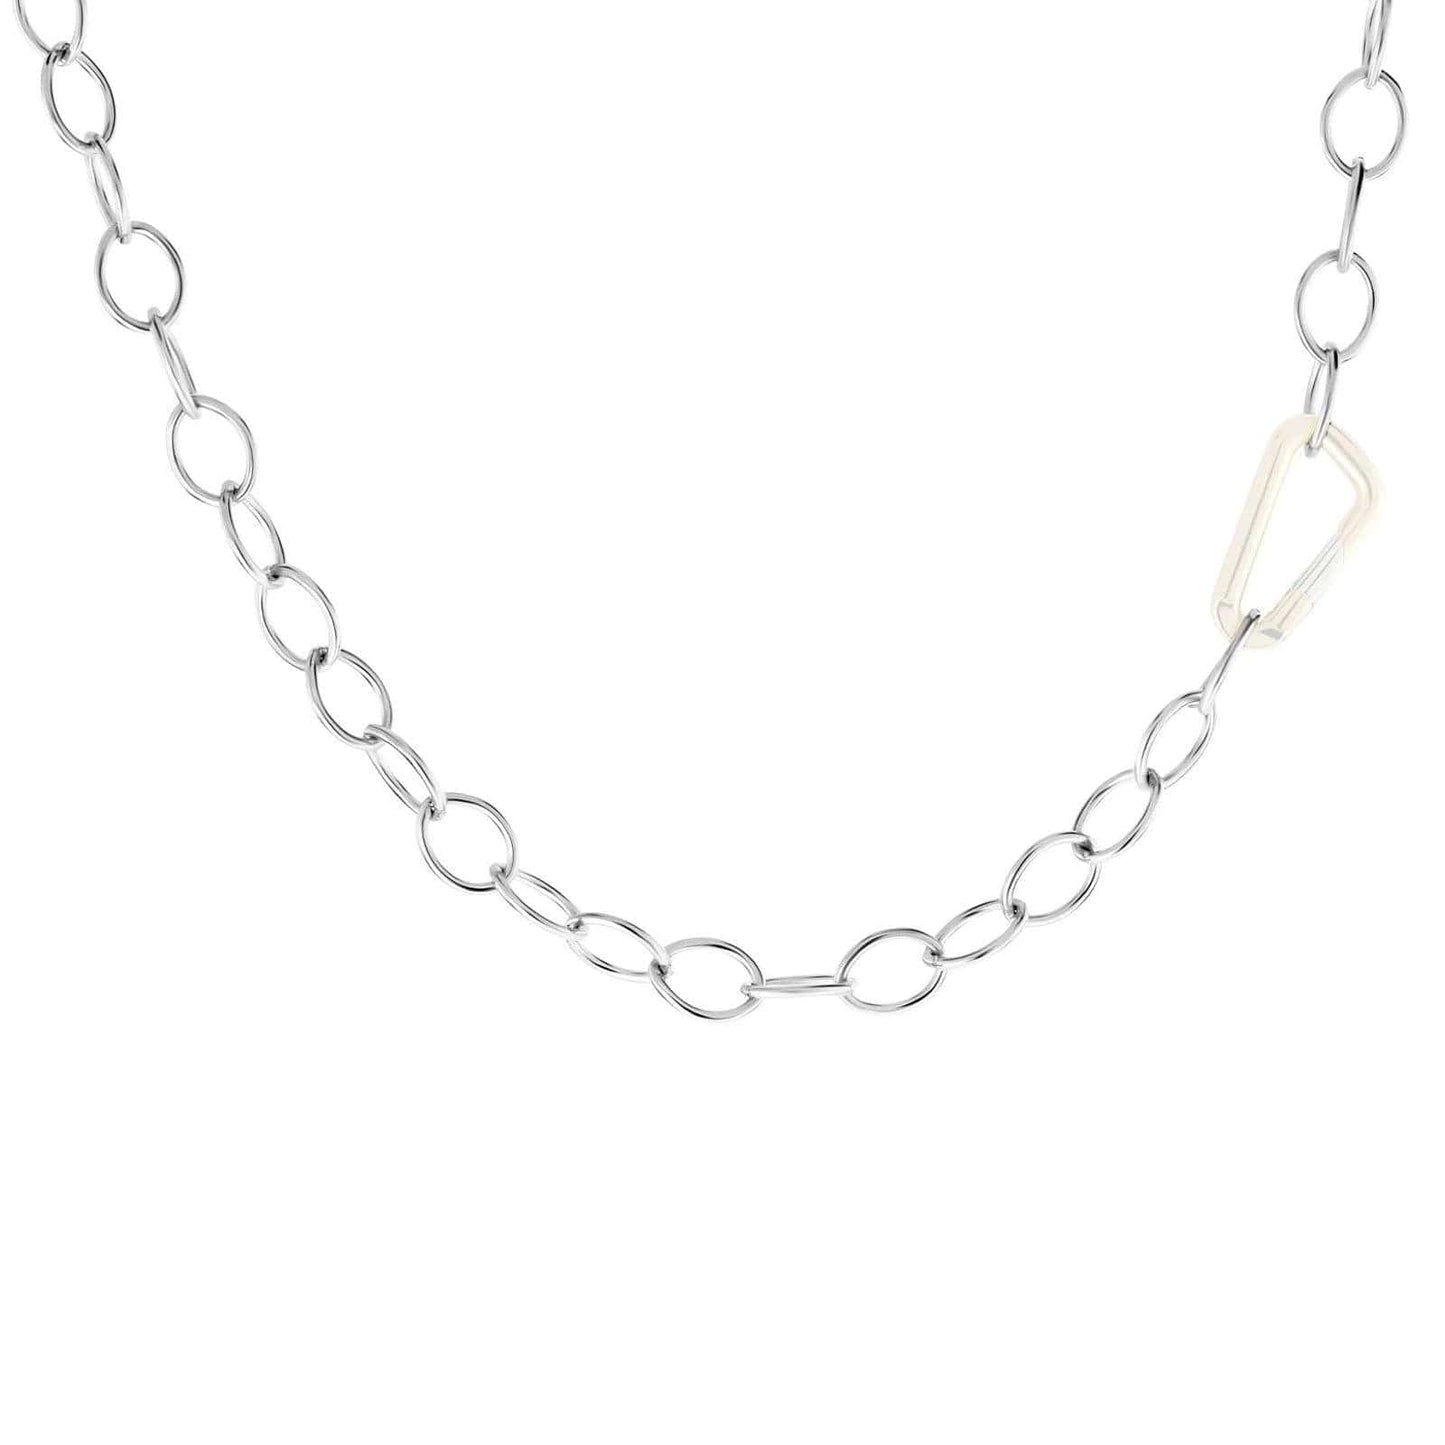 CHN 6.3mm Silver Chain With Clasp - No Hinge